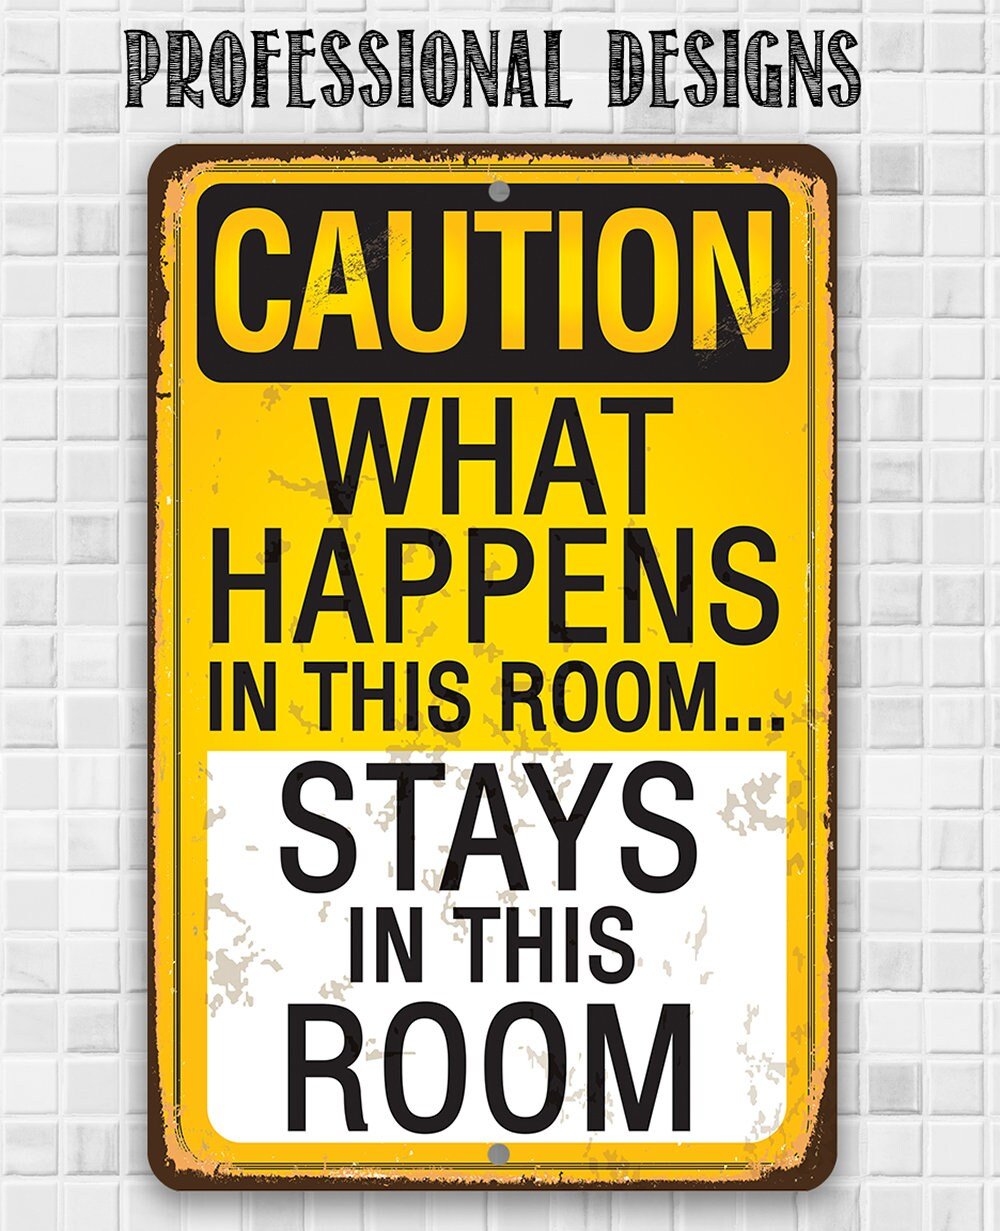 Caution, What Happens In This Room, Stays - 8" x 12" or 12" x 18" Aluminum Tin Awesome Metal Poster Lone Star Art 